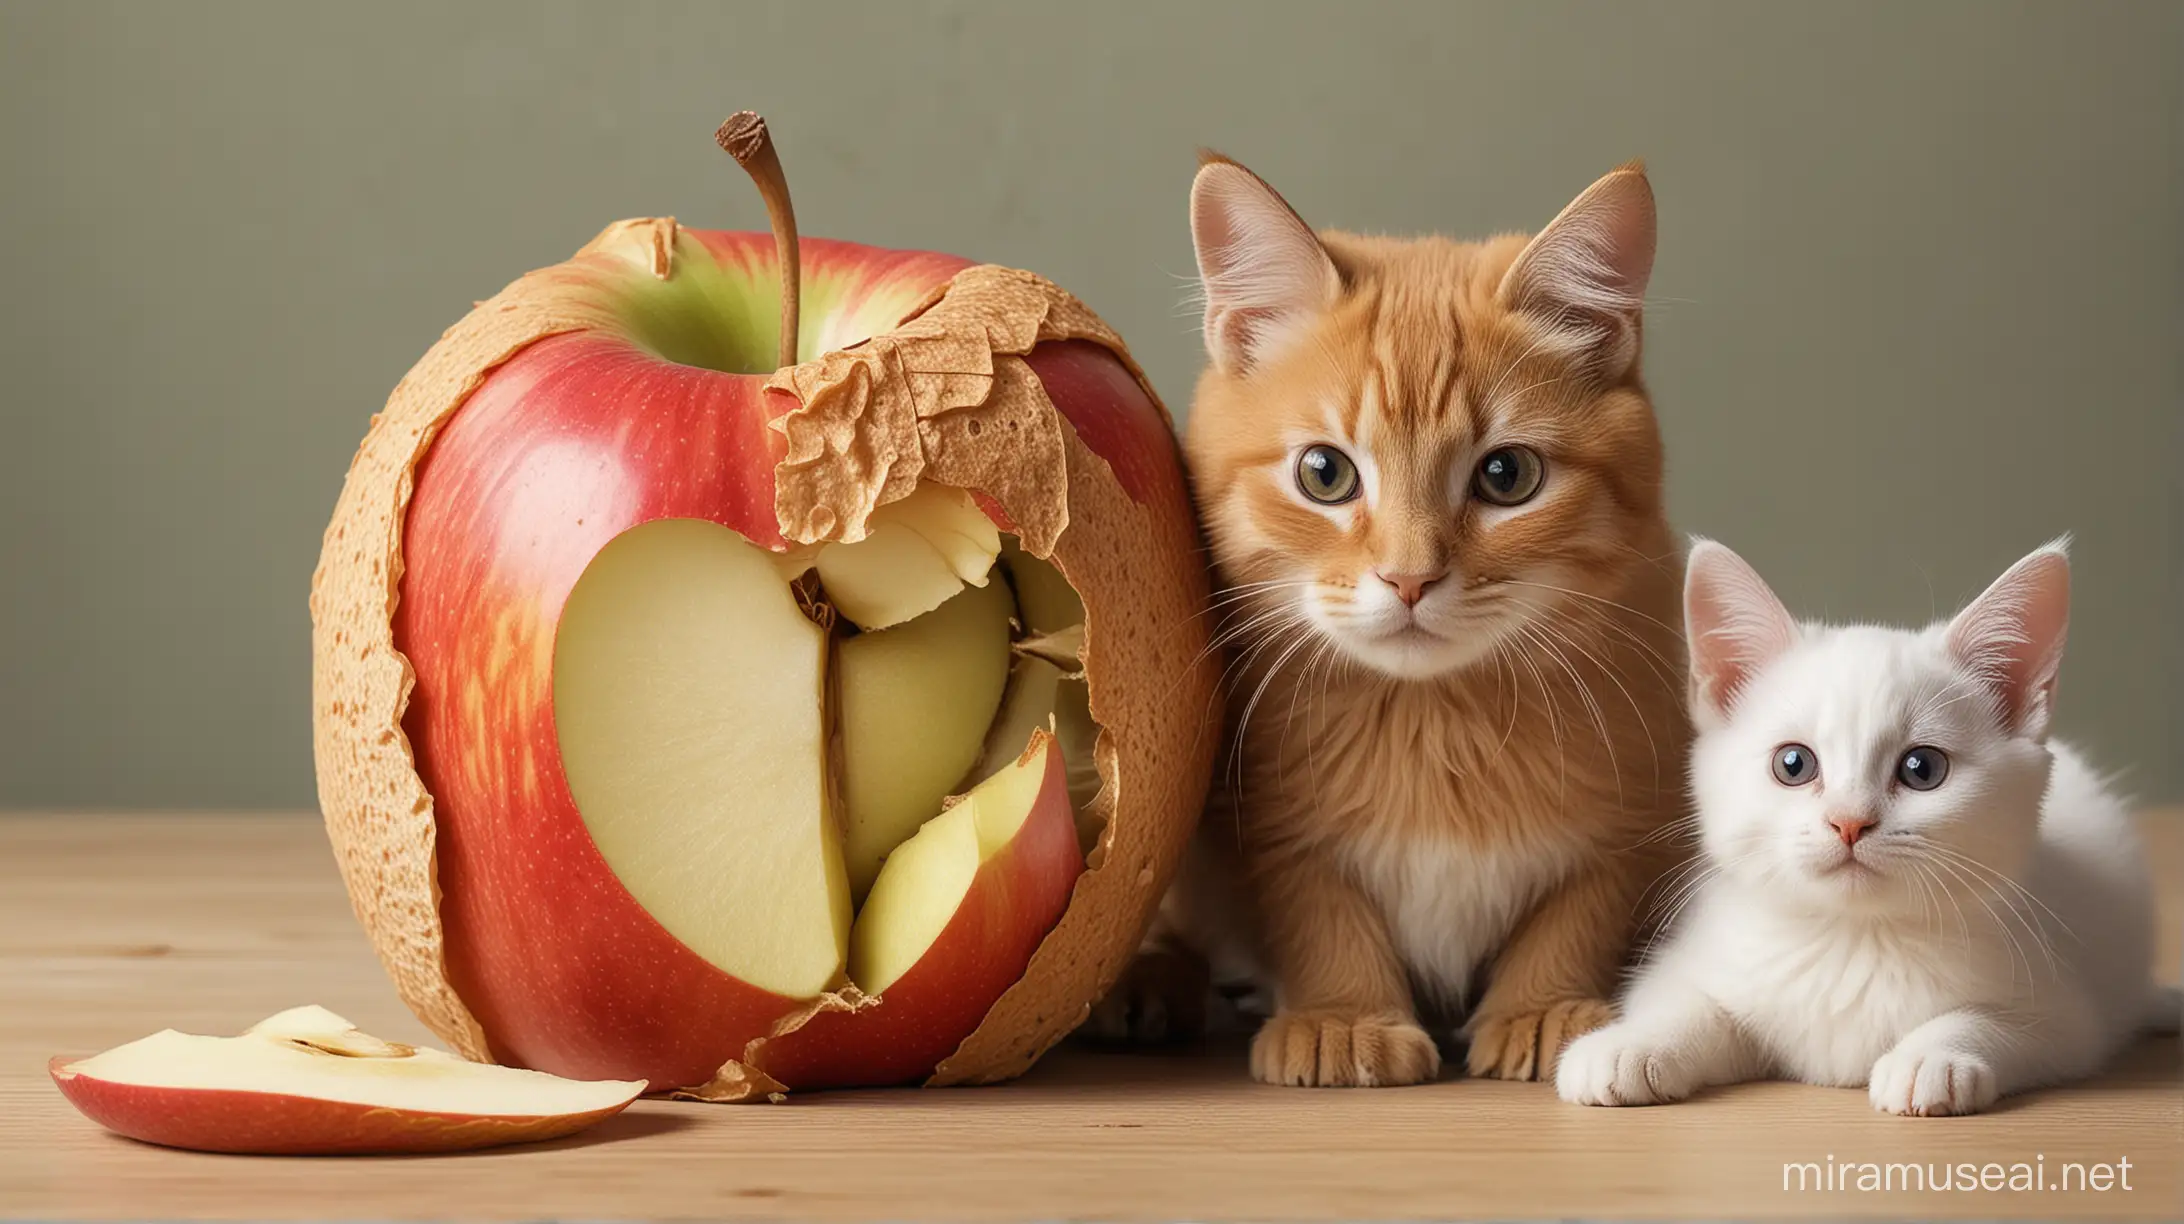 Cat and Rabbit with Apple Core